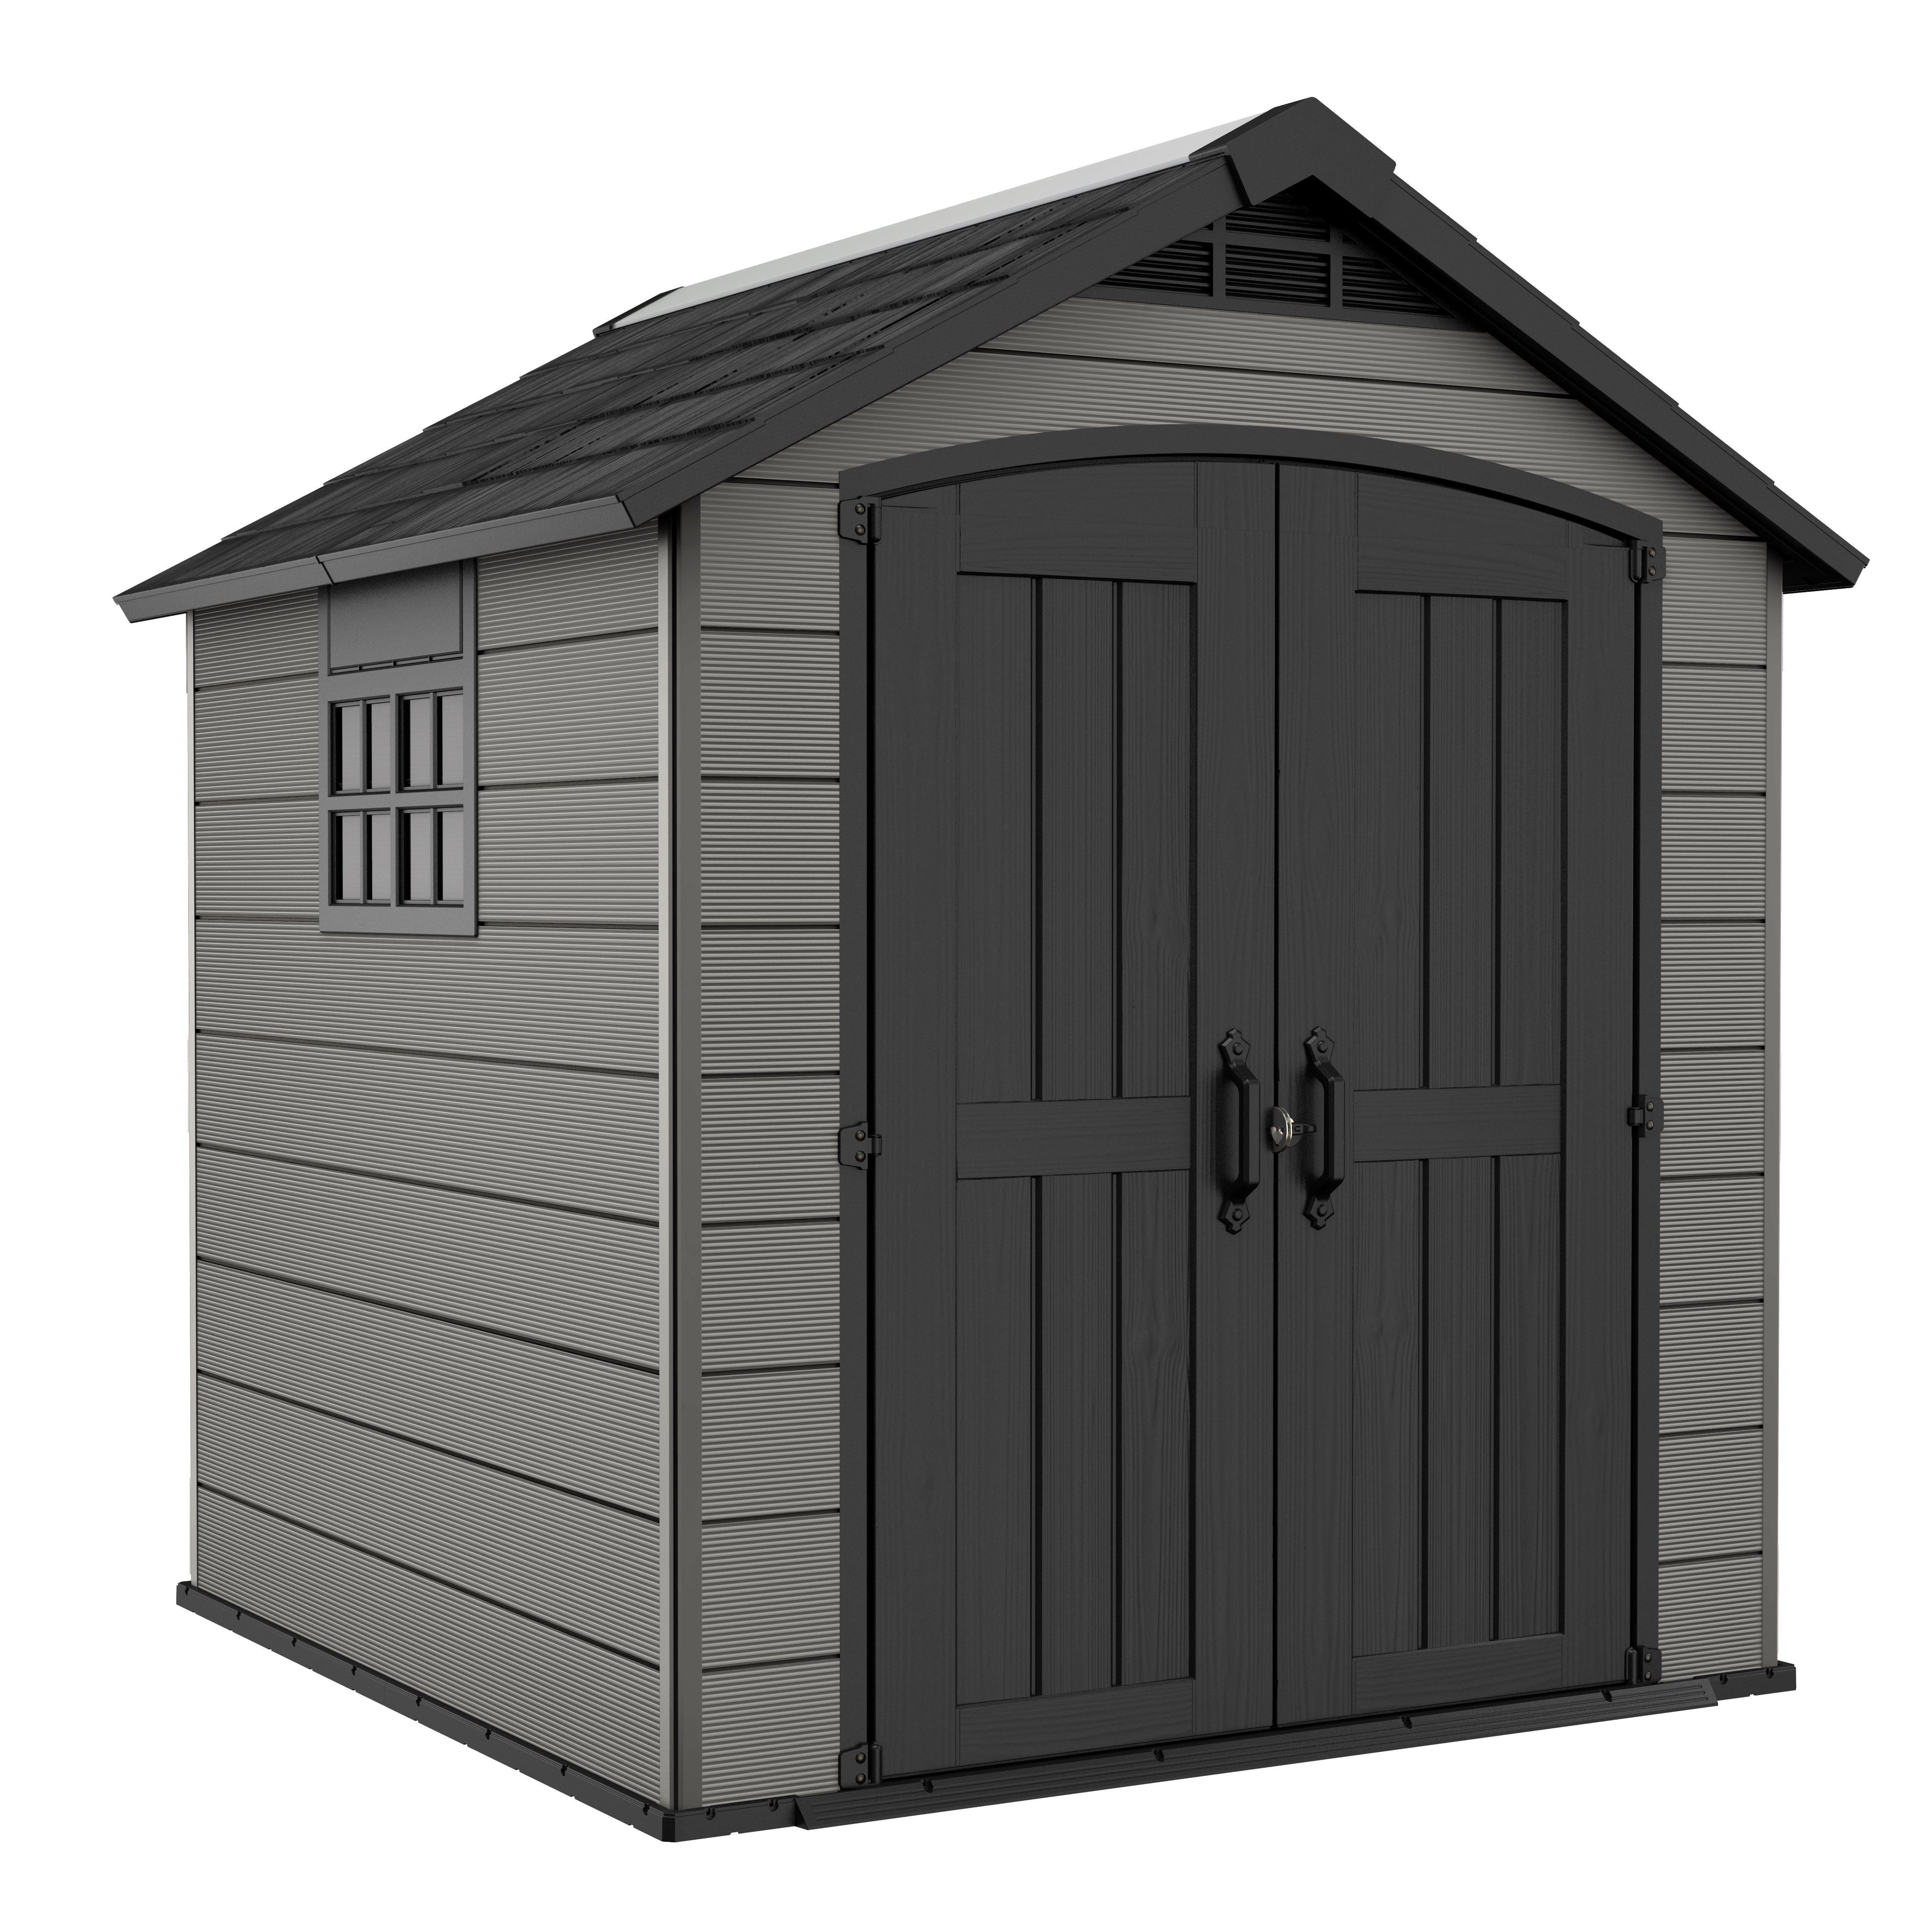 Keter Premier Apex Tongue & Groove Grey Plastic Shed With Floor